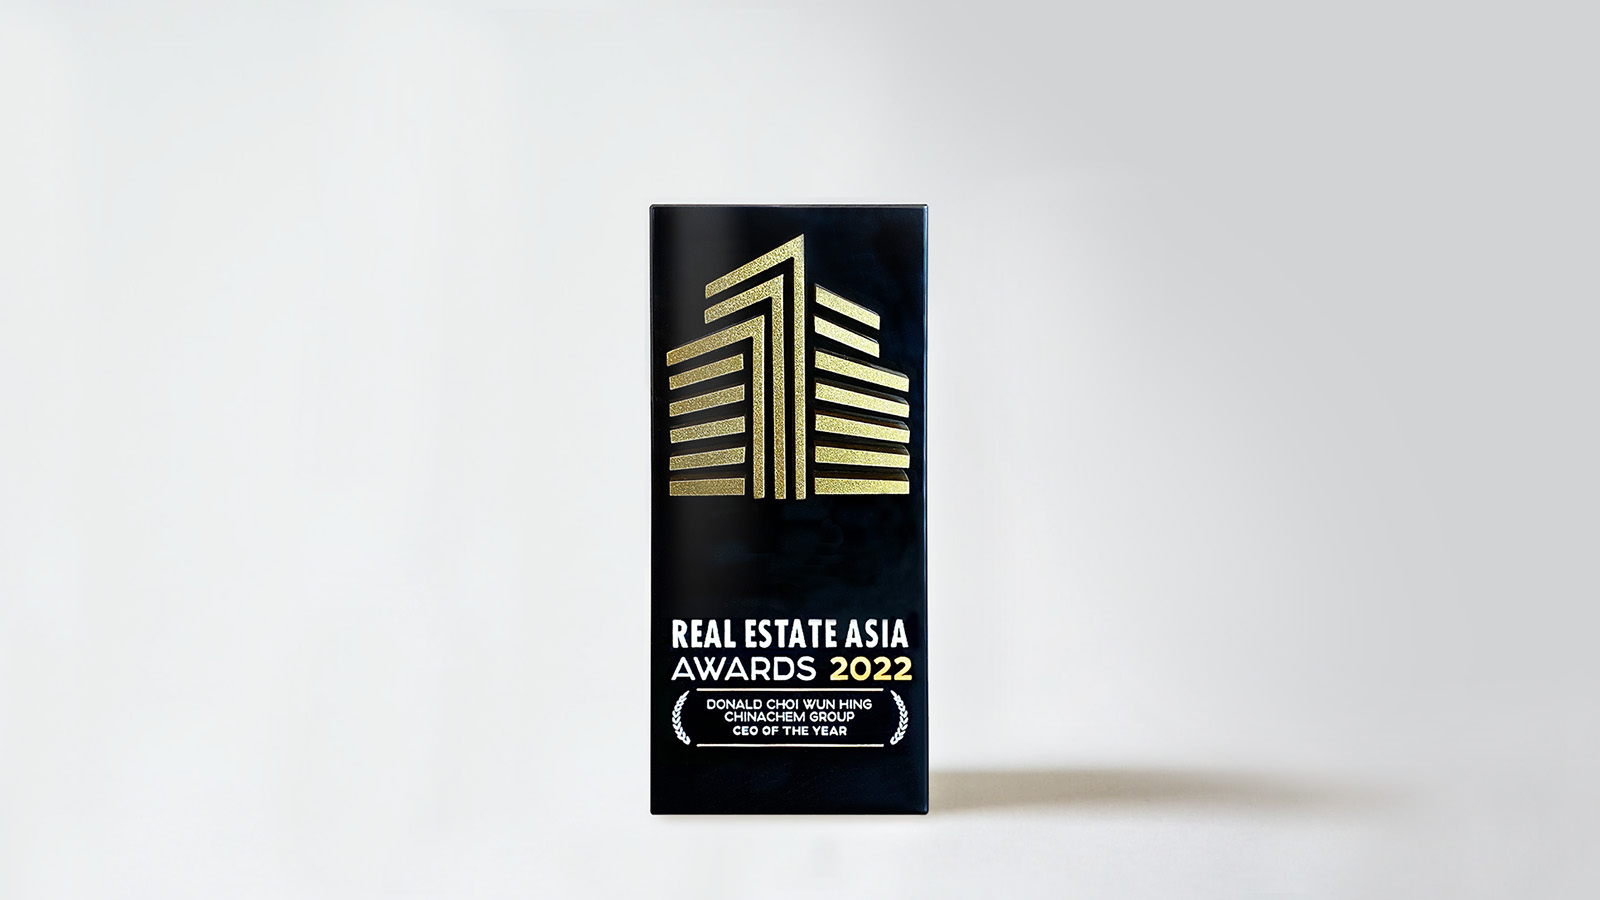 Real Estate Asia Awards 2022 | CEO of the Year | 華懋集團 蔡宏興